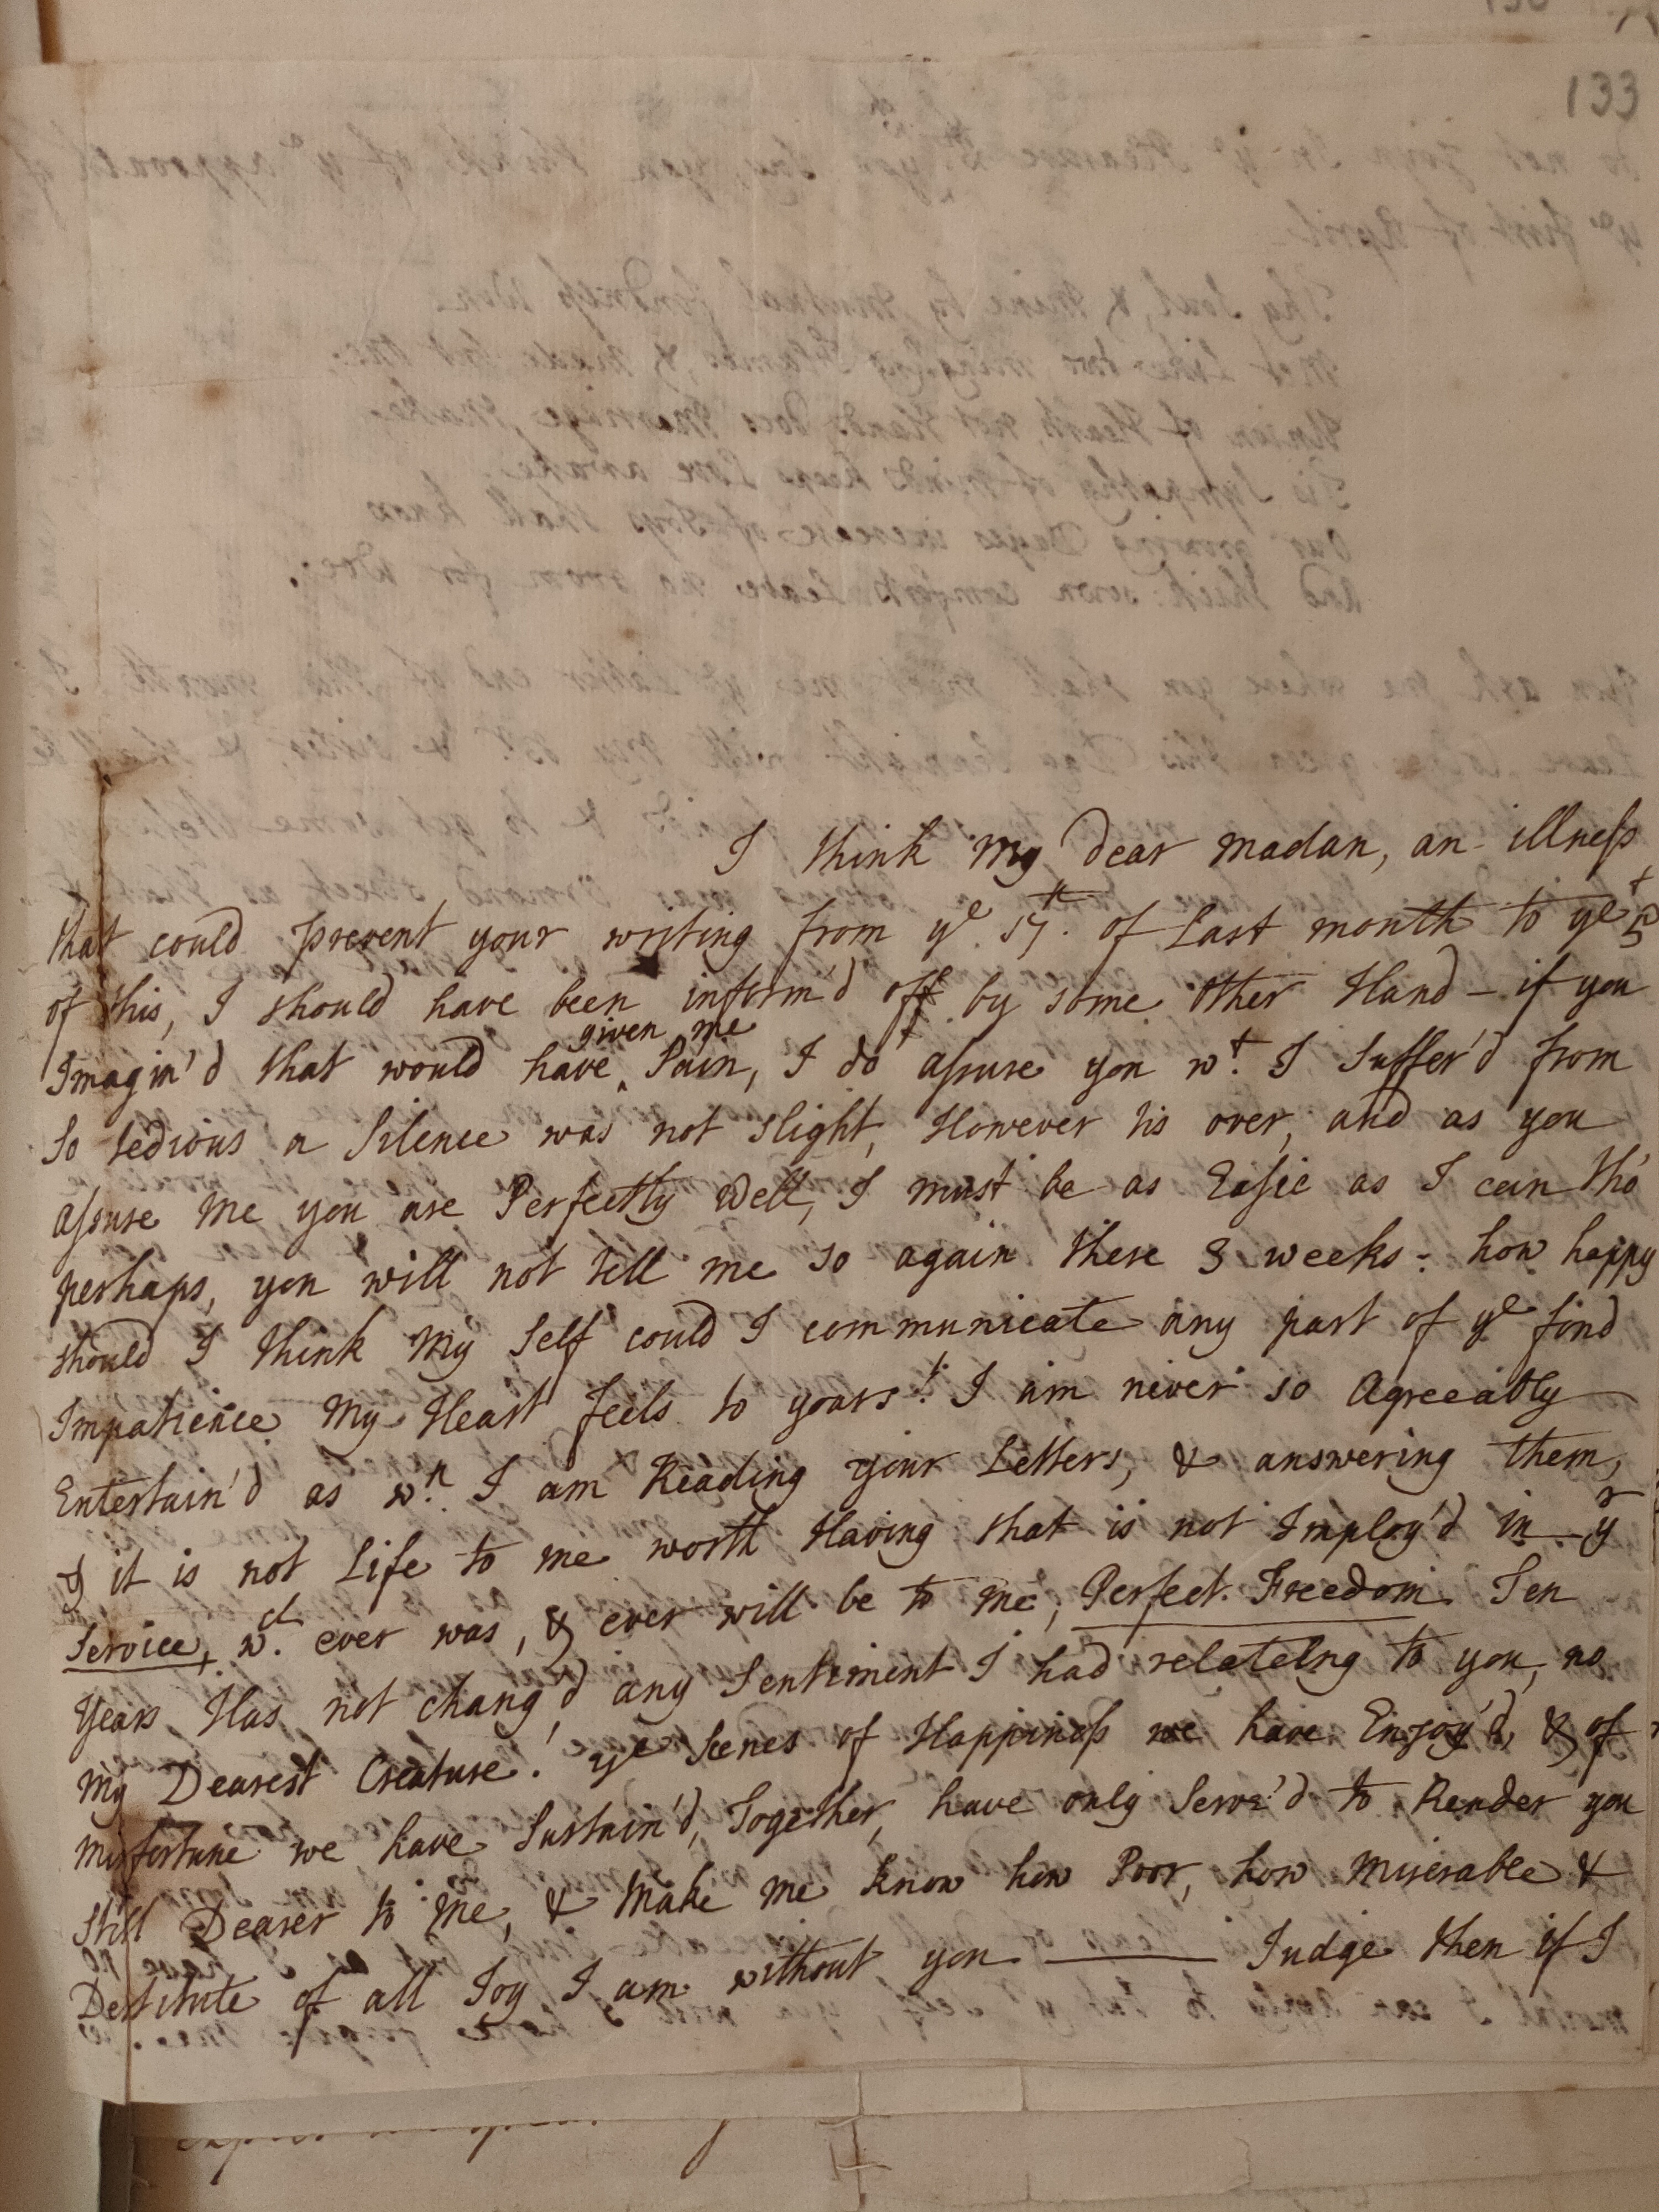 Image #1 of letter: Judith Madan to Martin Madan, 10 March 1734